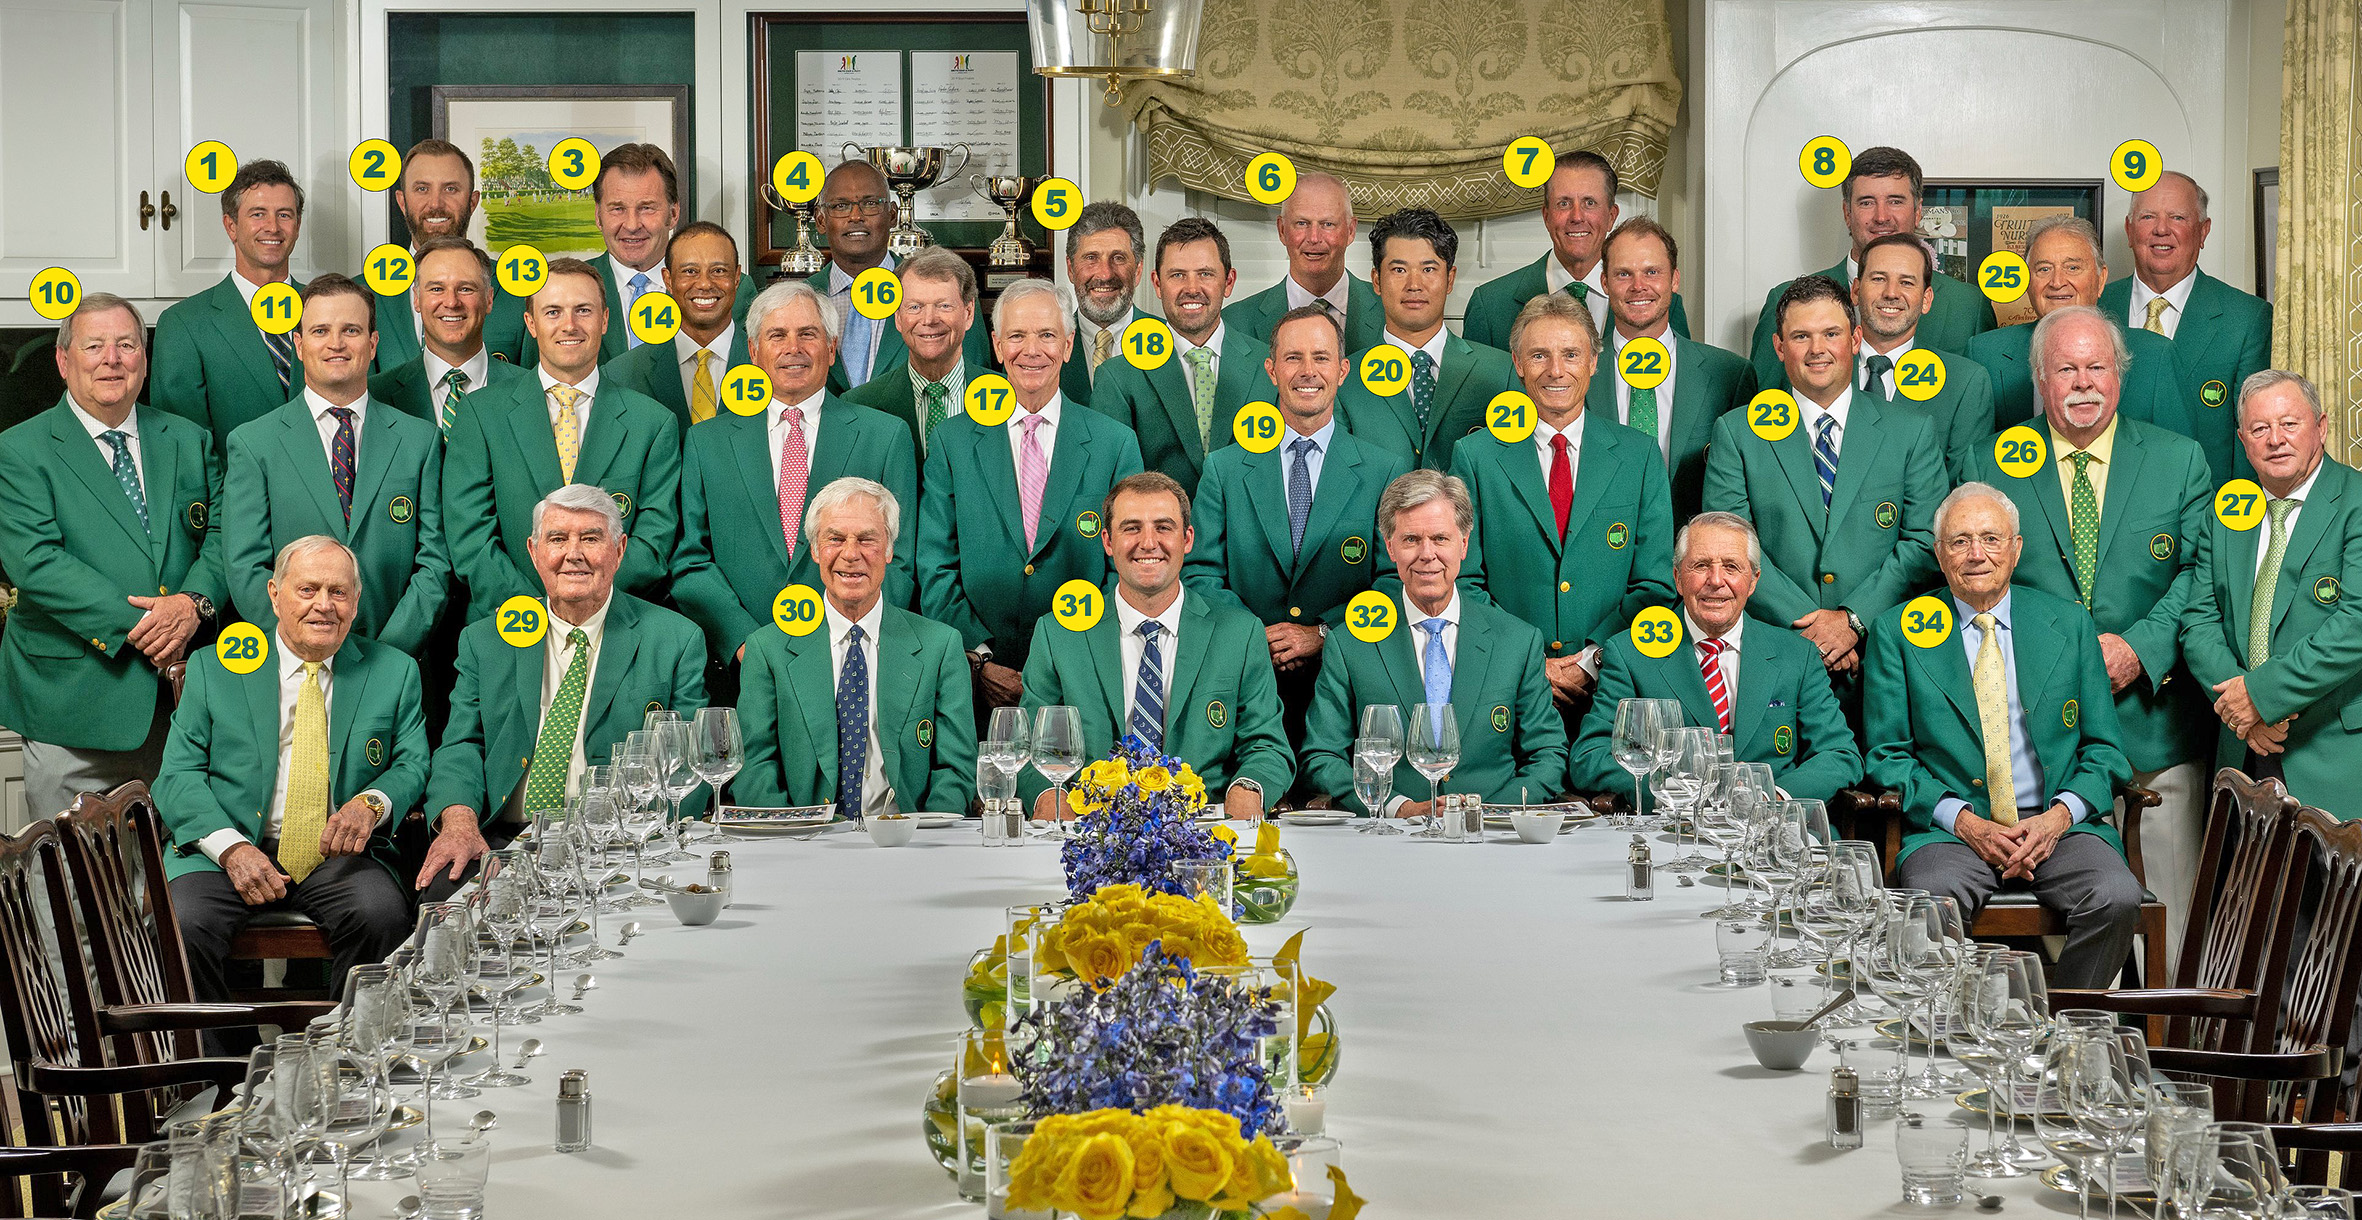 The 2023 Champions Dinner how many can you name?